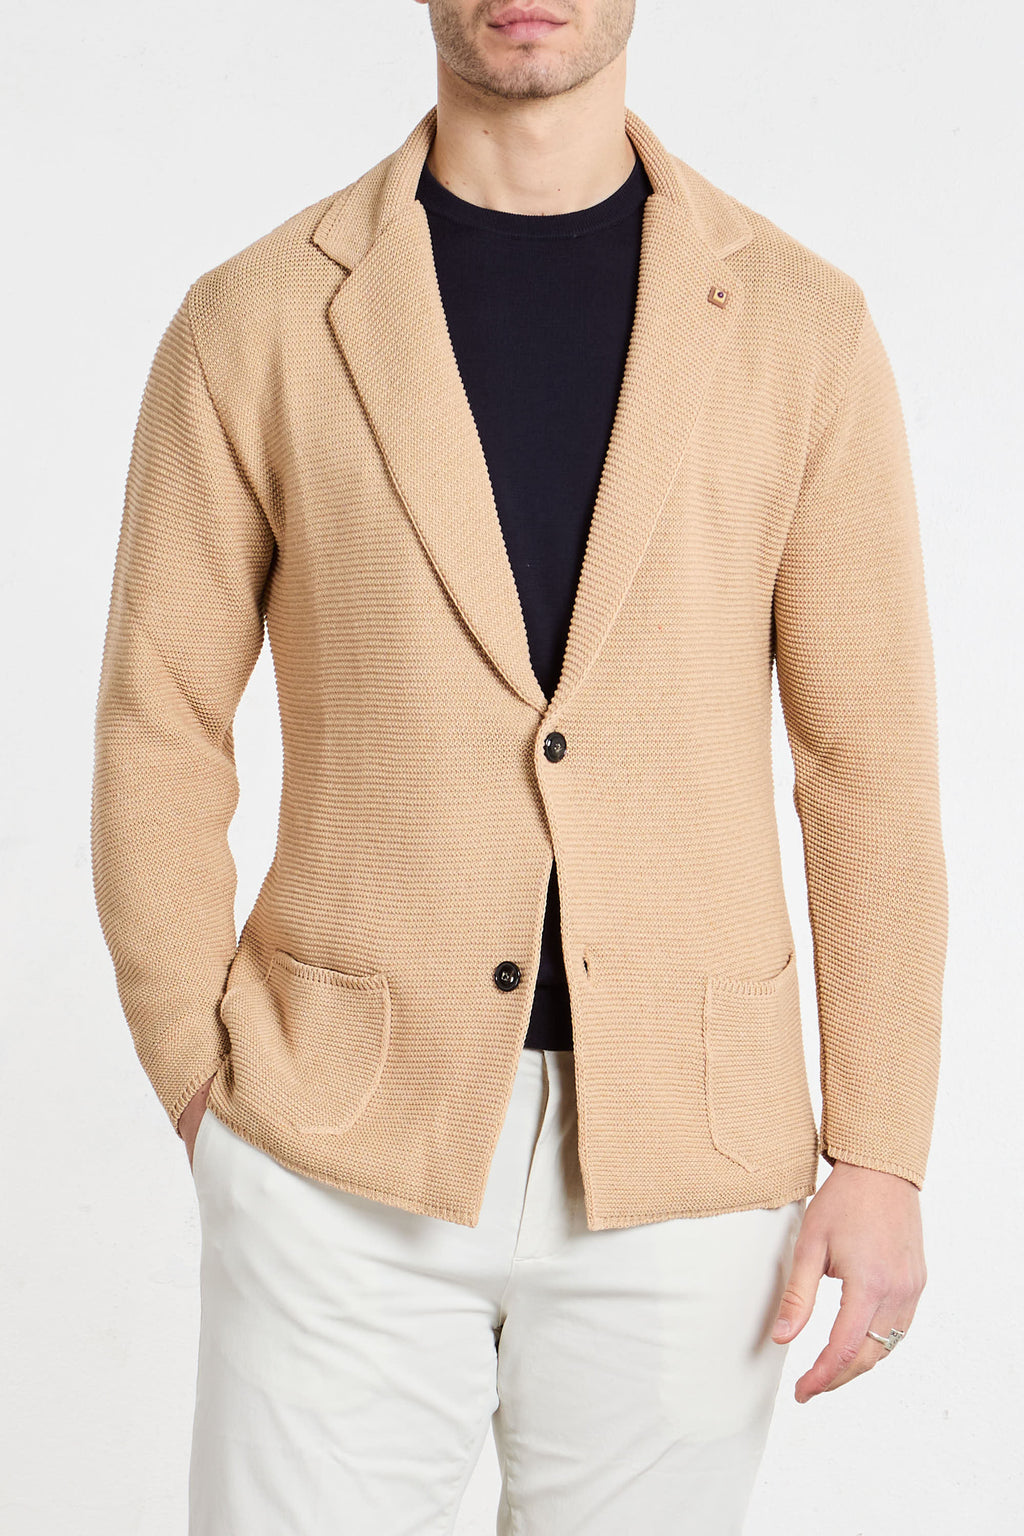 OutFit Single-Breasted Cotton Blend Camel Knit Jacket